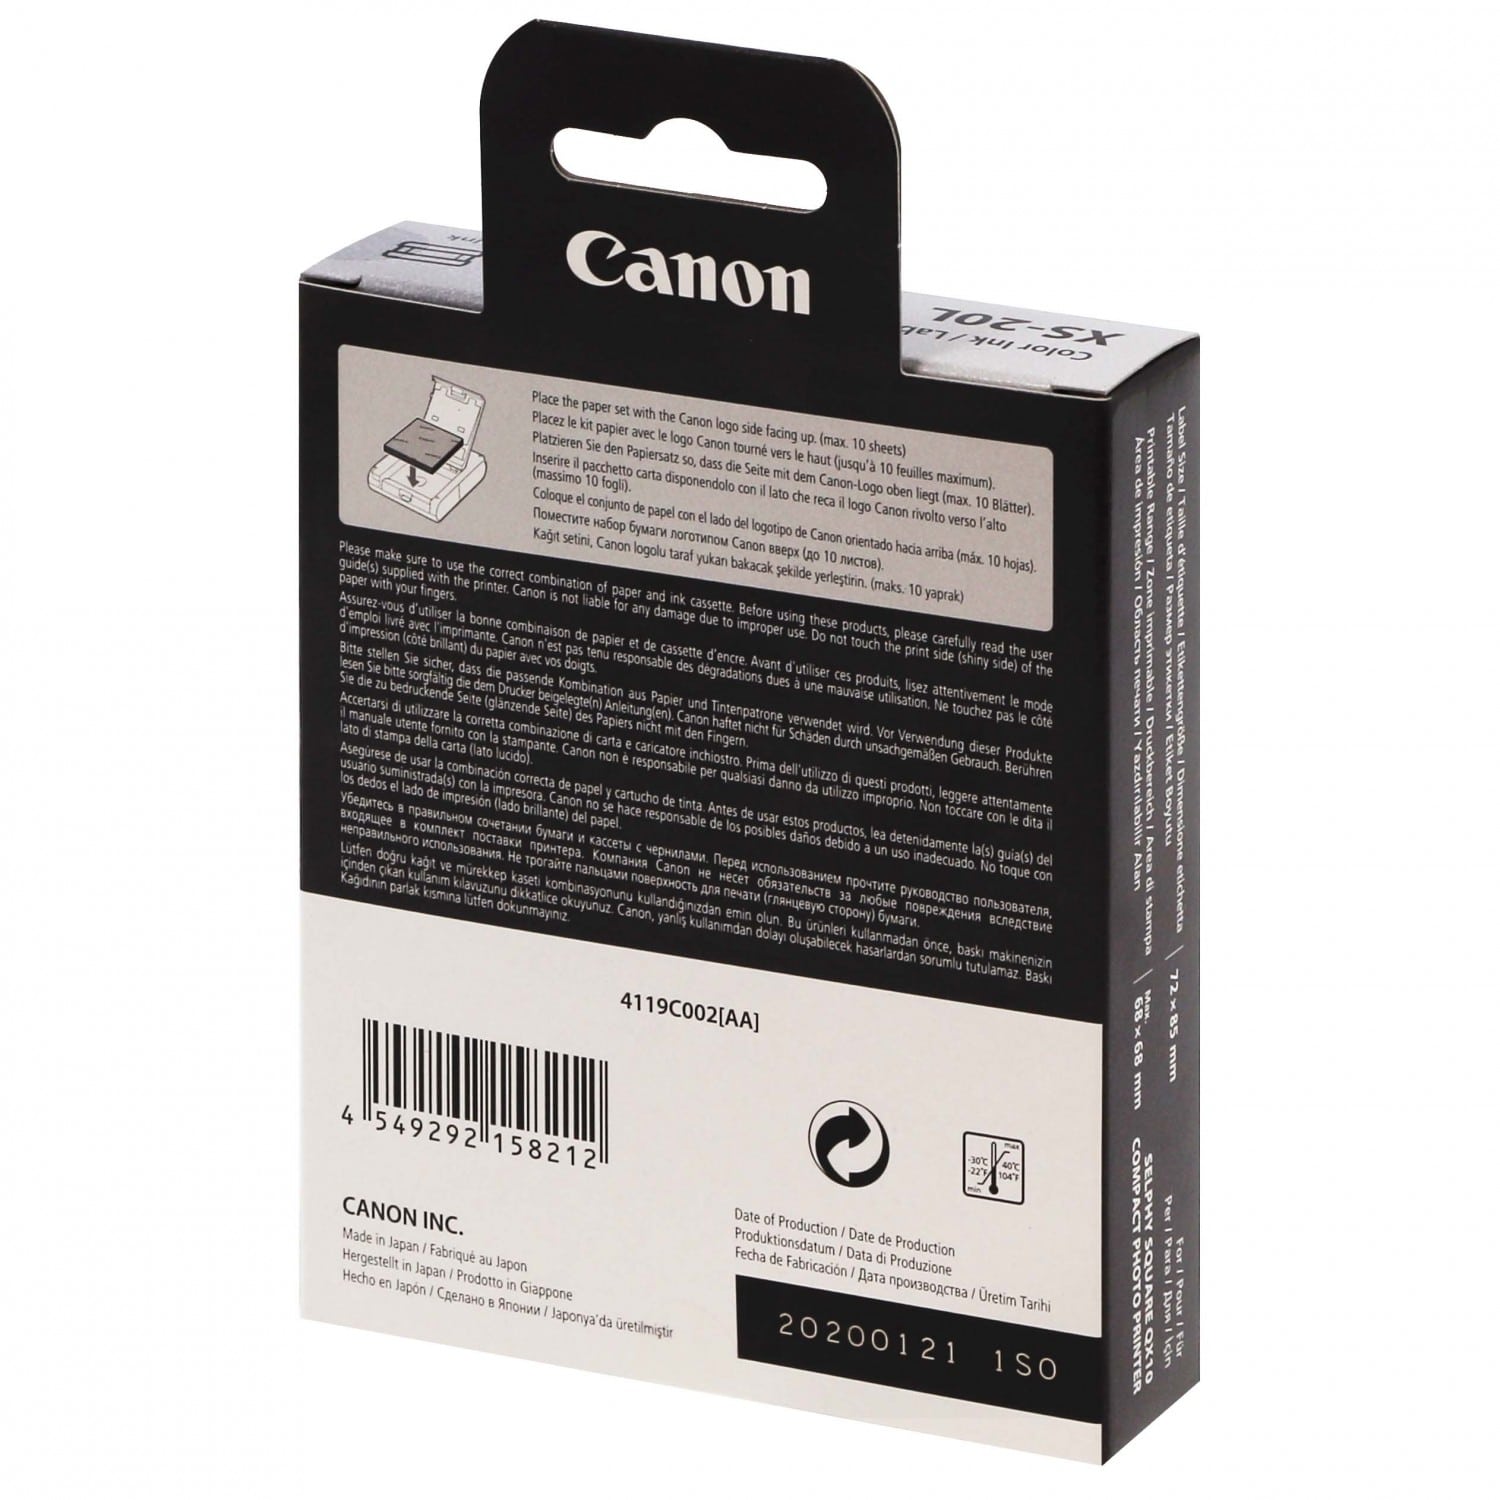 Consommable thermique CANON Kit KP-36IP pour Selphy CP - 36